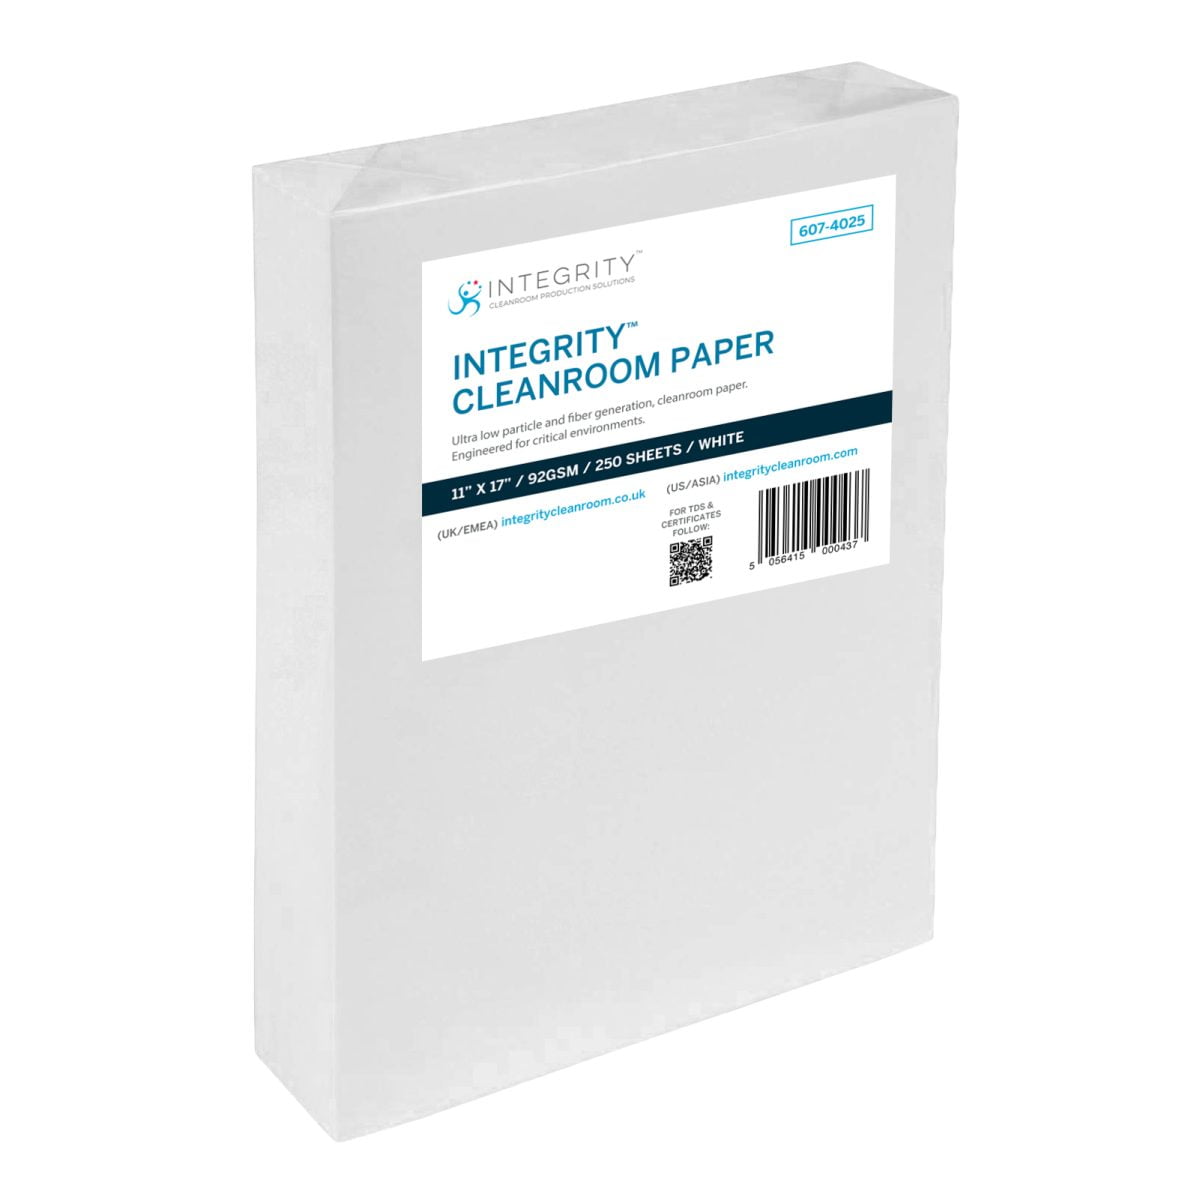 Cleanroom Paper - White - Integrity